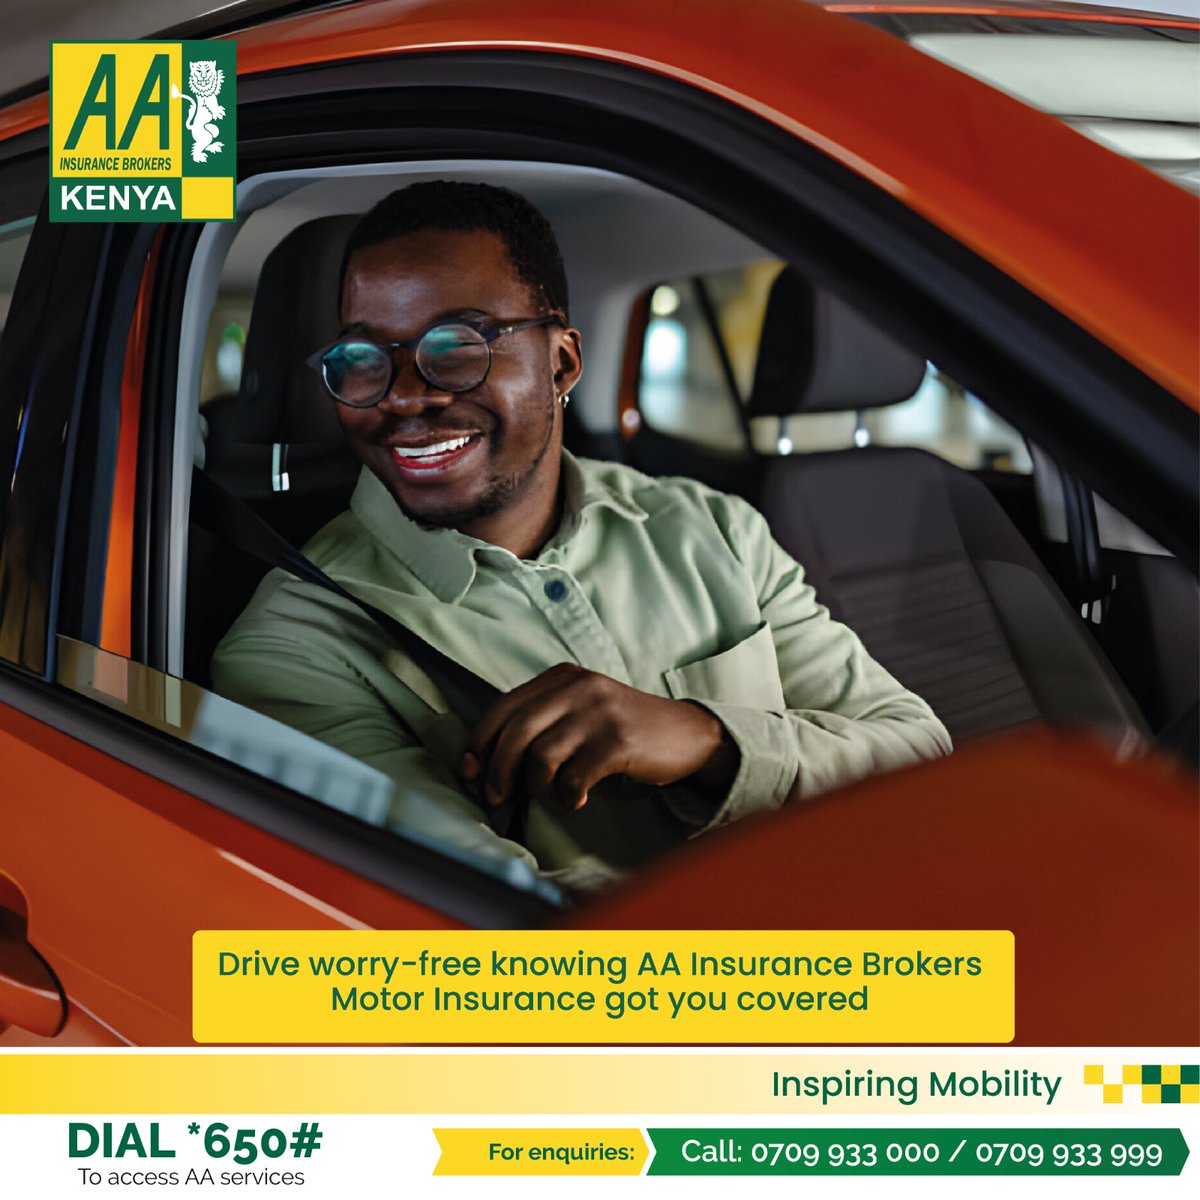 Stay protected on the road with AA Insurance Brokers Motor Insurance. Drive confidently knowing you're in safe hands. Request for a free quote, call us on 0720940636
#AAIBCares #MotorInsurance